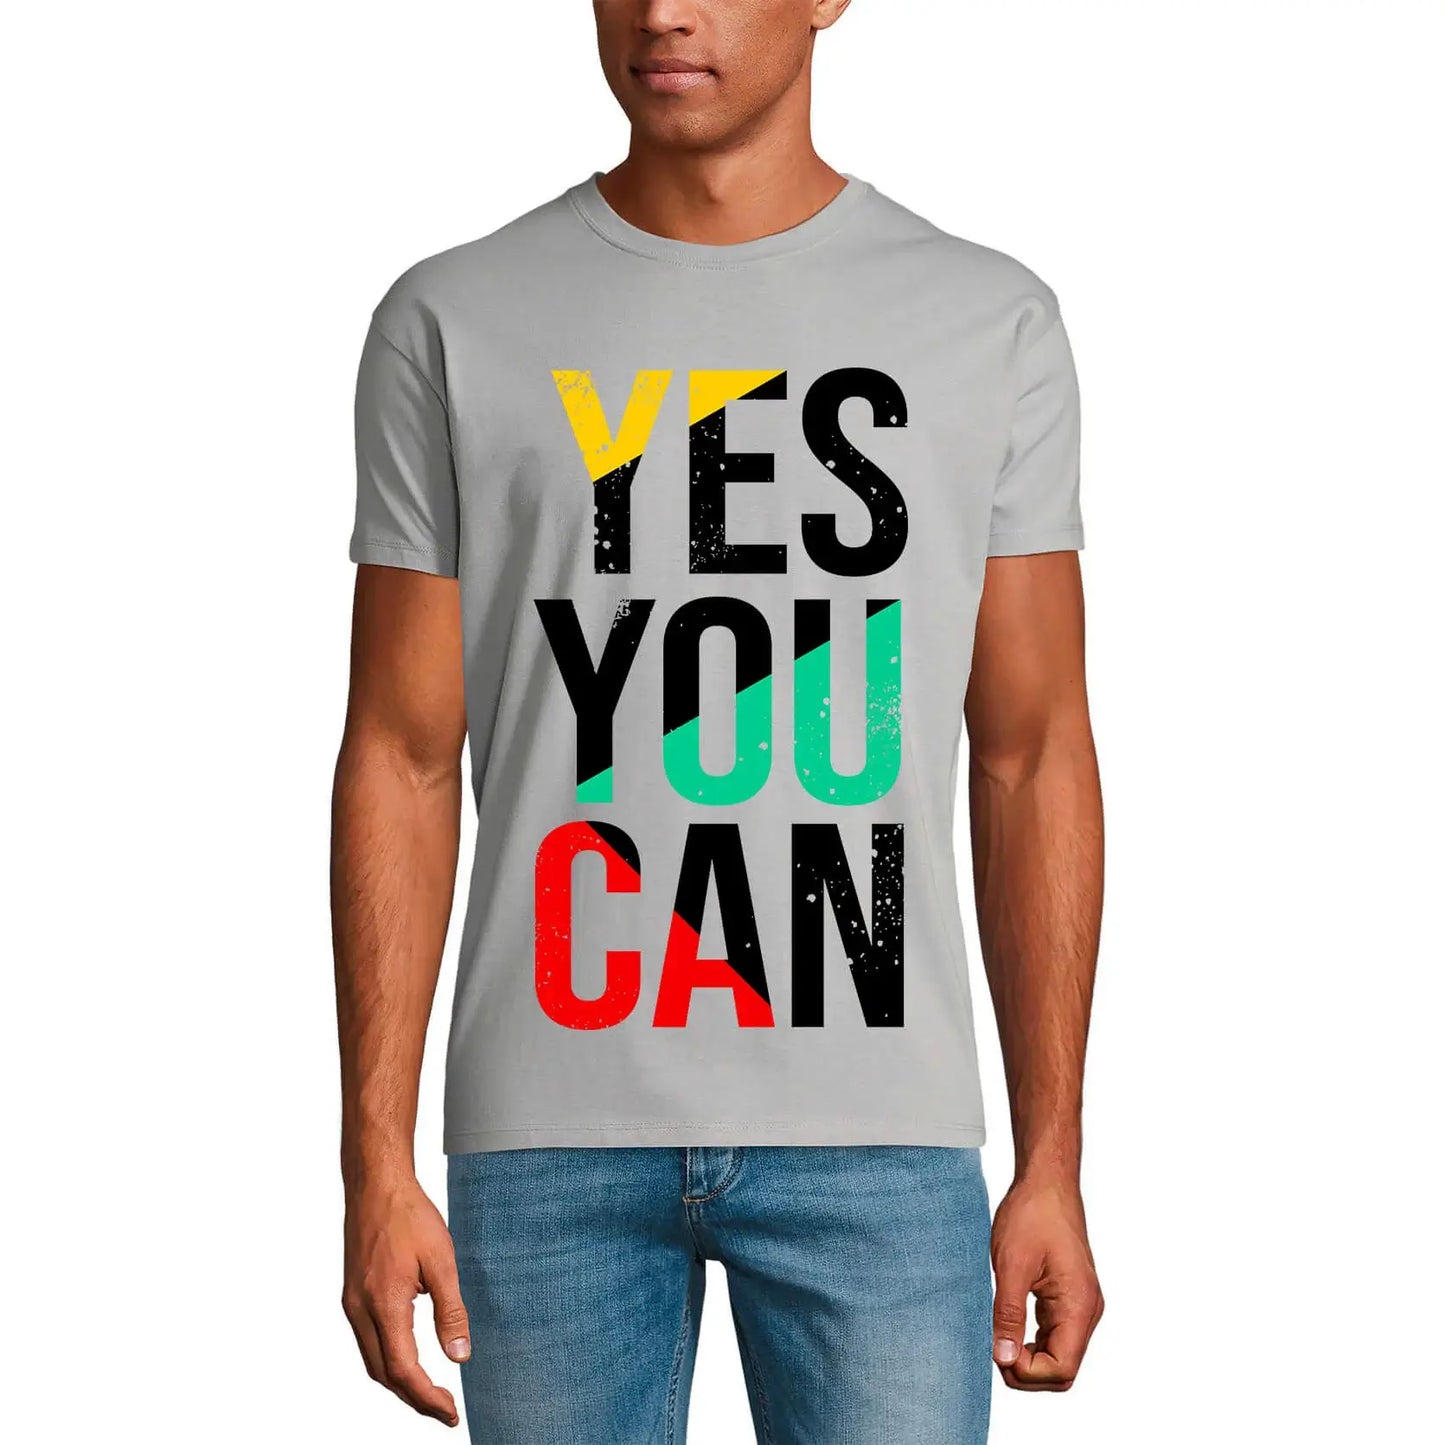 Men's Graphic T-Shirt Yes You Can Novelty Eco-Friendly Limited Edition Short Sleeve Tee-Shirt Vintage Birthday Gift Novelty